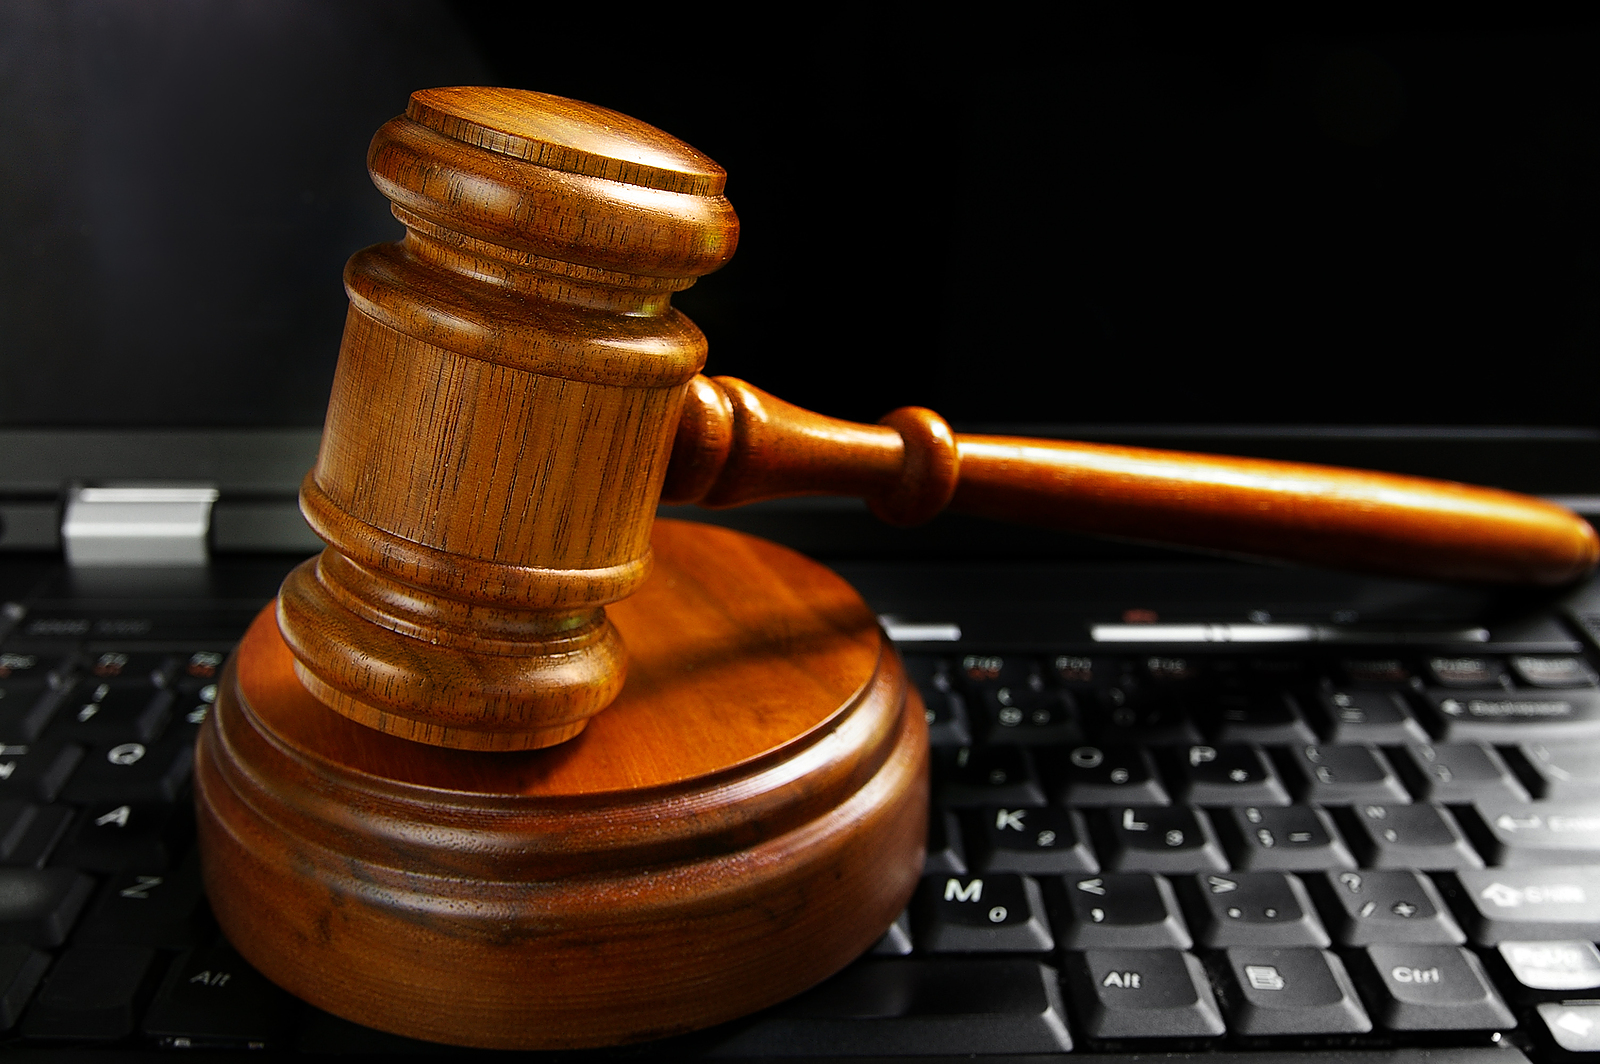  The Role of a Computer and Internet Lawyer